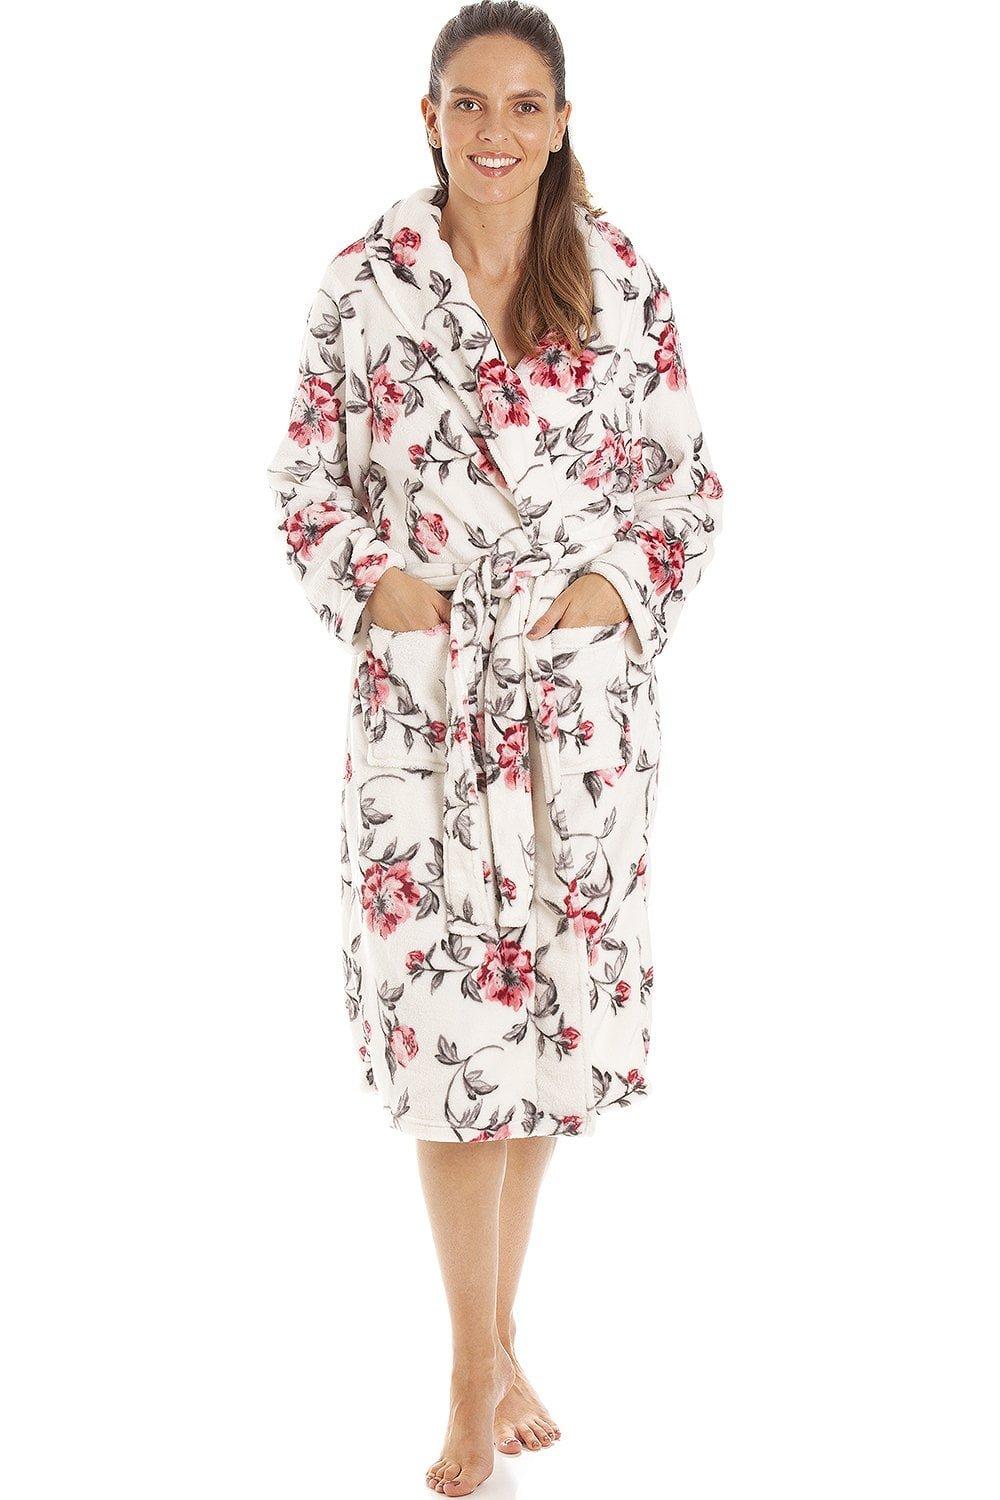 Camille Women's Super Soft Fleece Housecoat -Floral Zip Up Bathrobe - Long  Sleeved and Side Pockets for Ultimate Comfort & Warmth Blue 10-12 :  Amazon.co.uk: Fashion